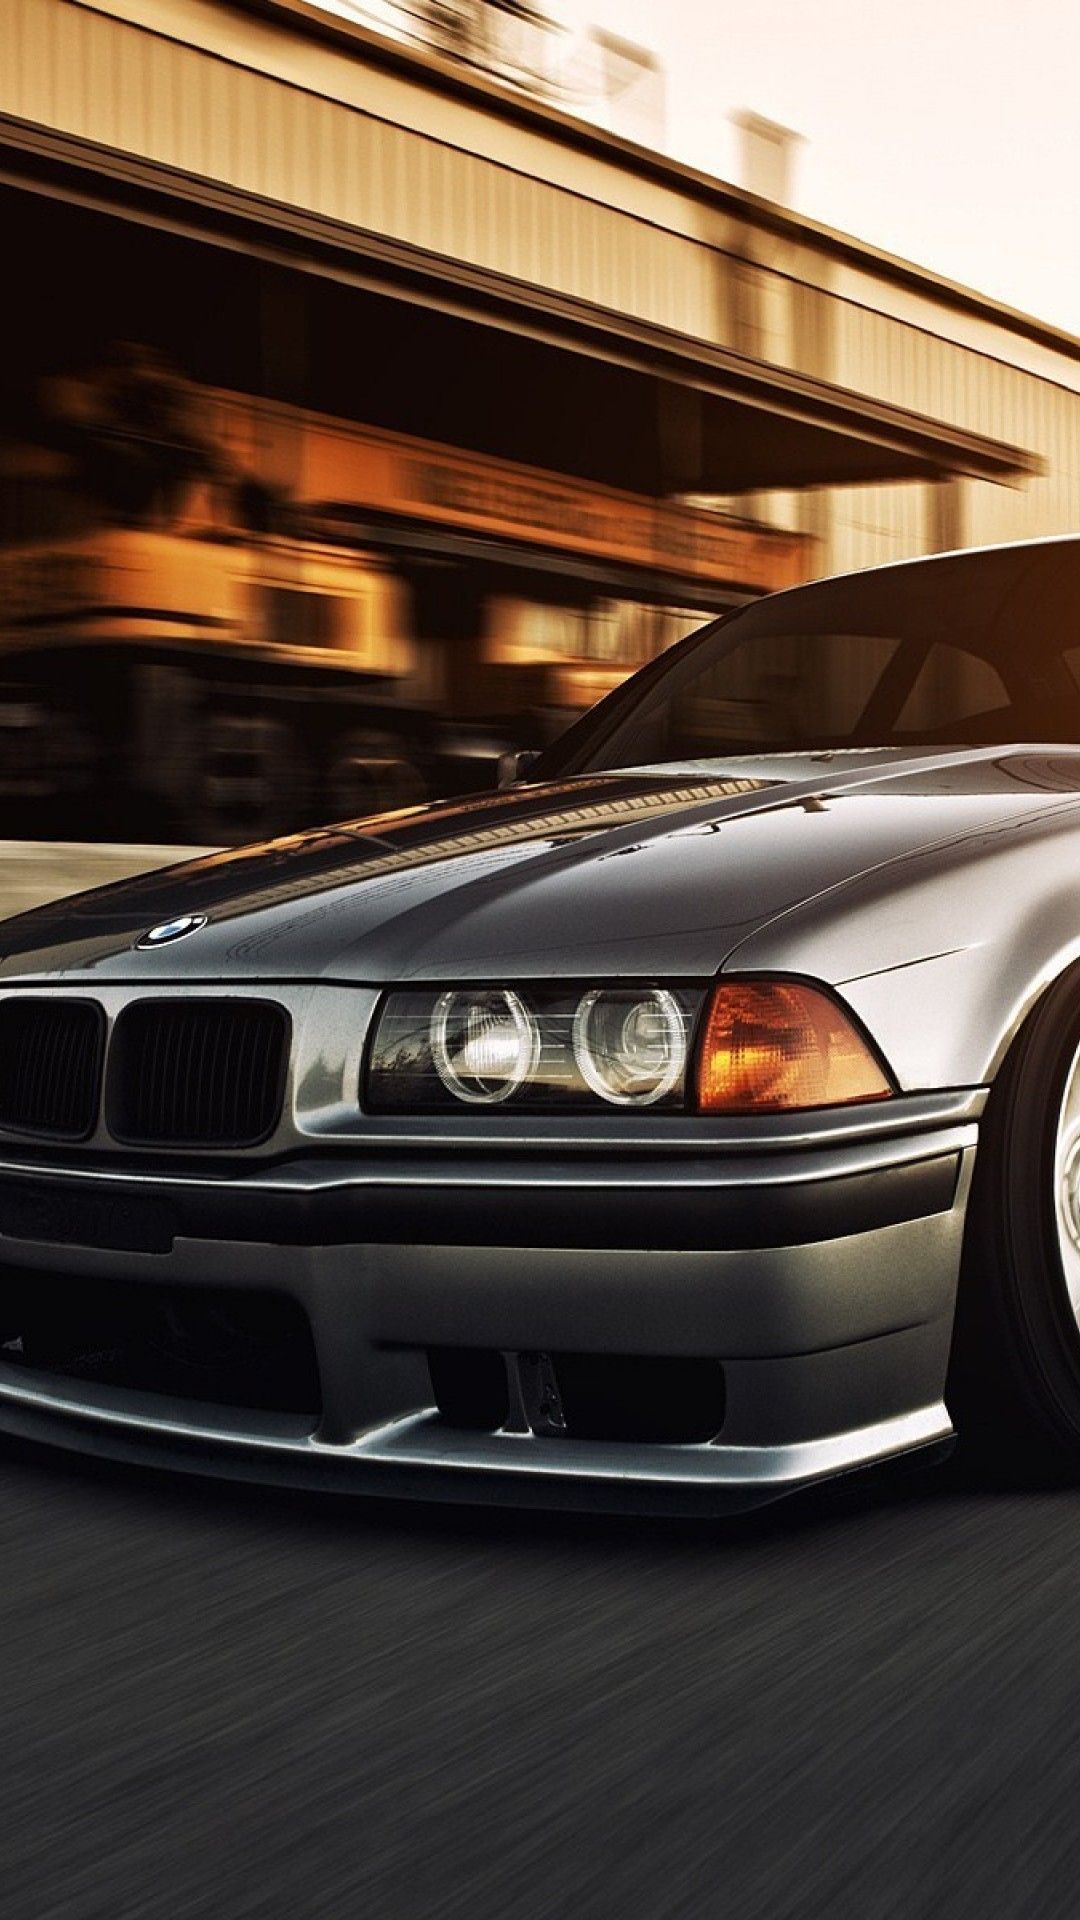 Bmw Iphone 6 Wallpapers Wallpaper Cave